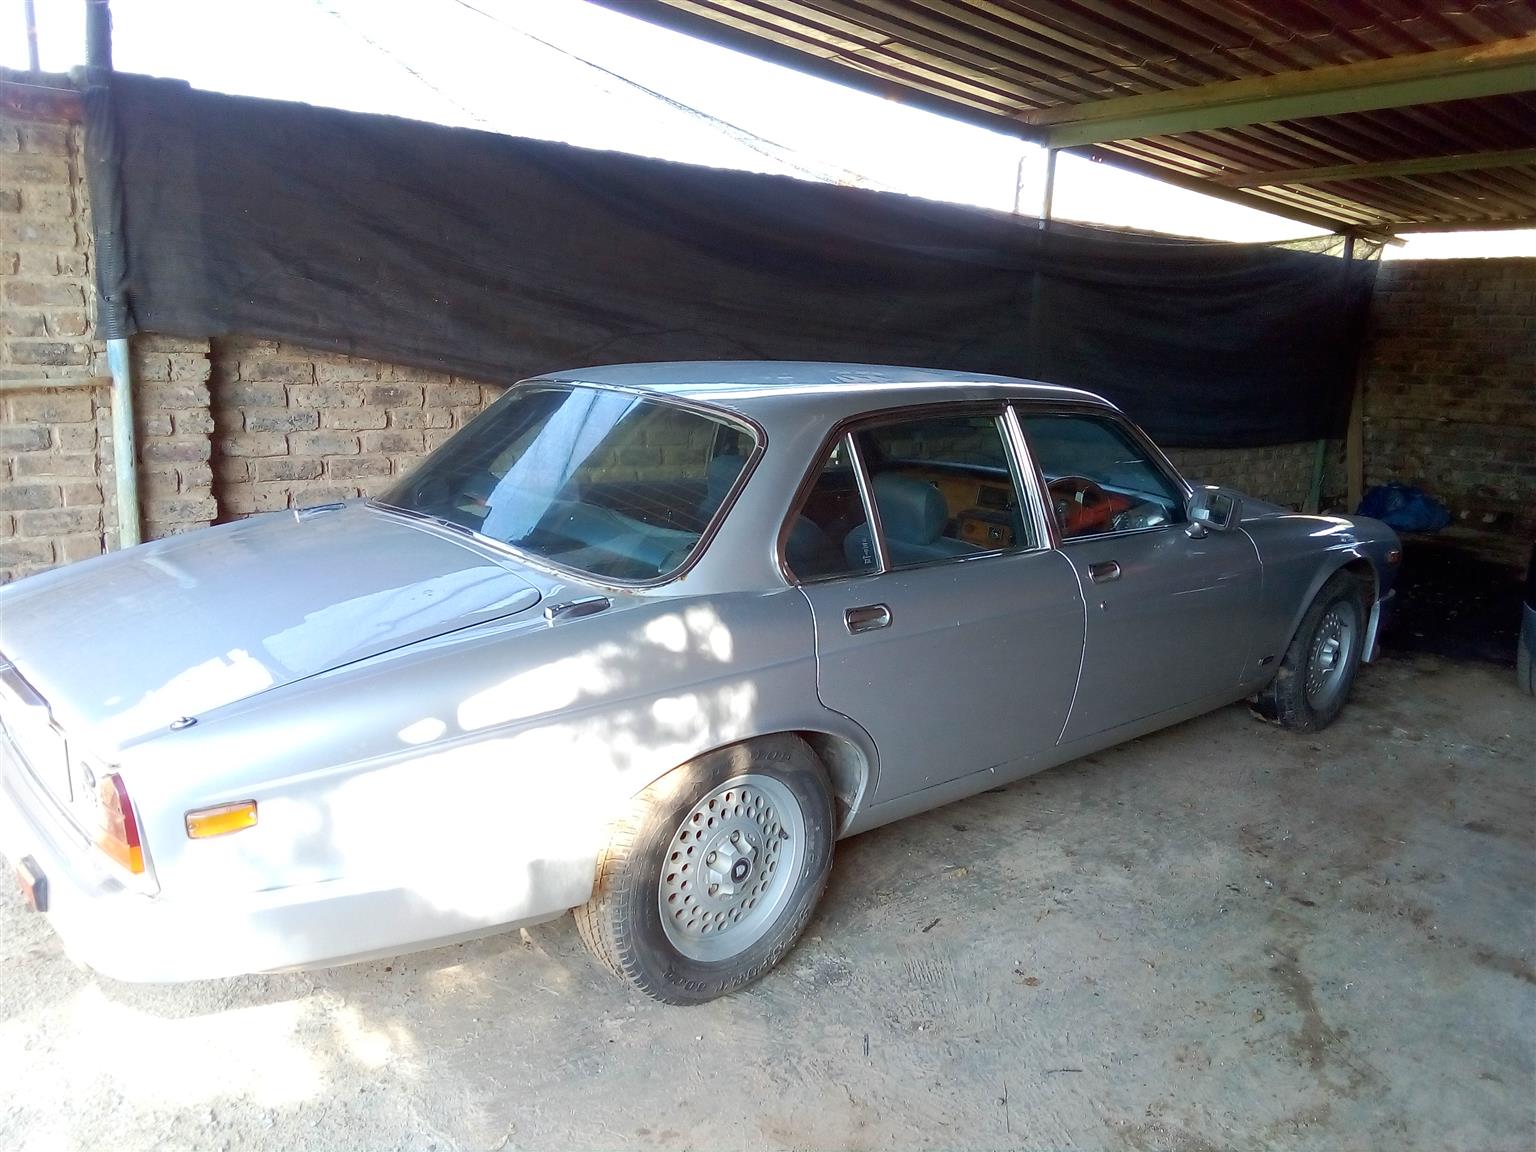 Xj6 350 Chevy motor and 350 turbo box needs attention